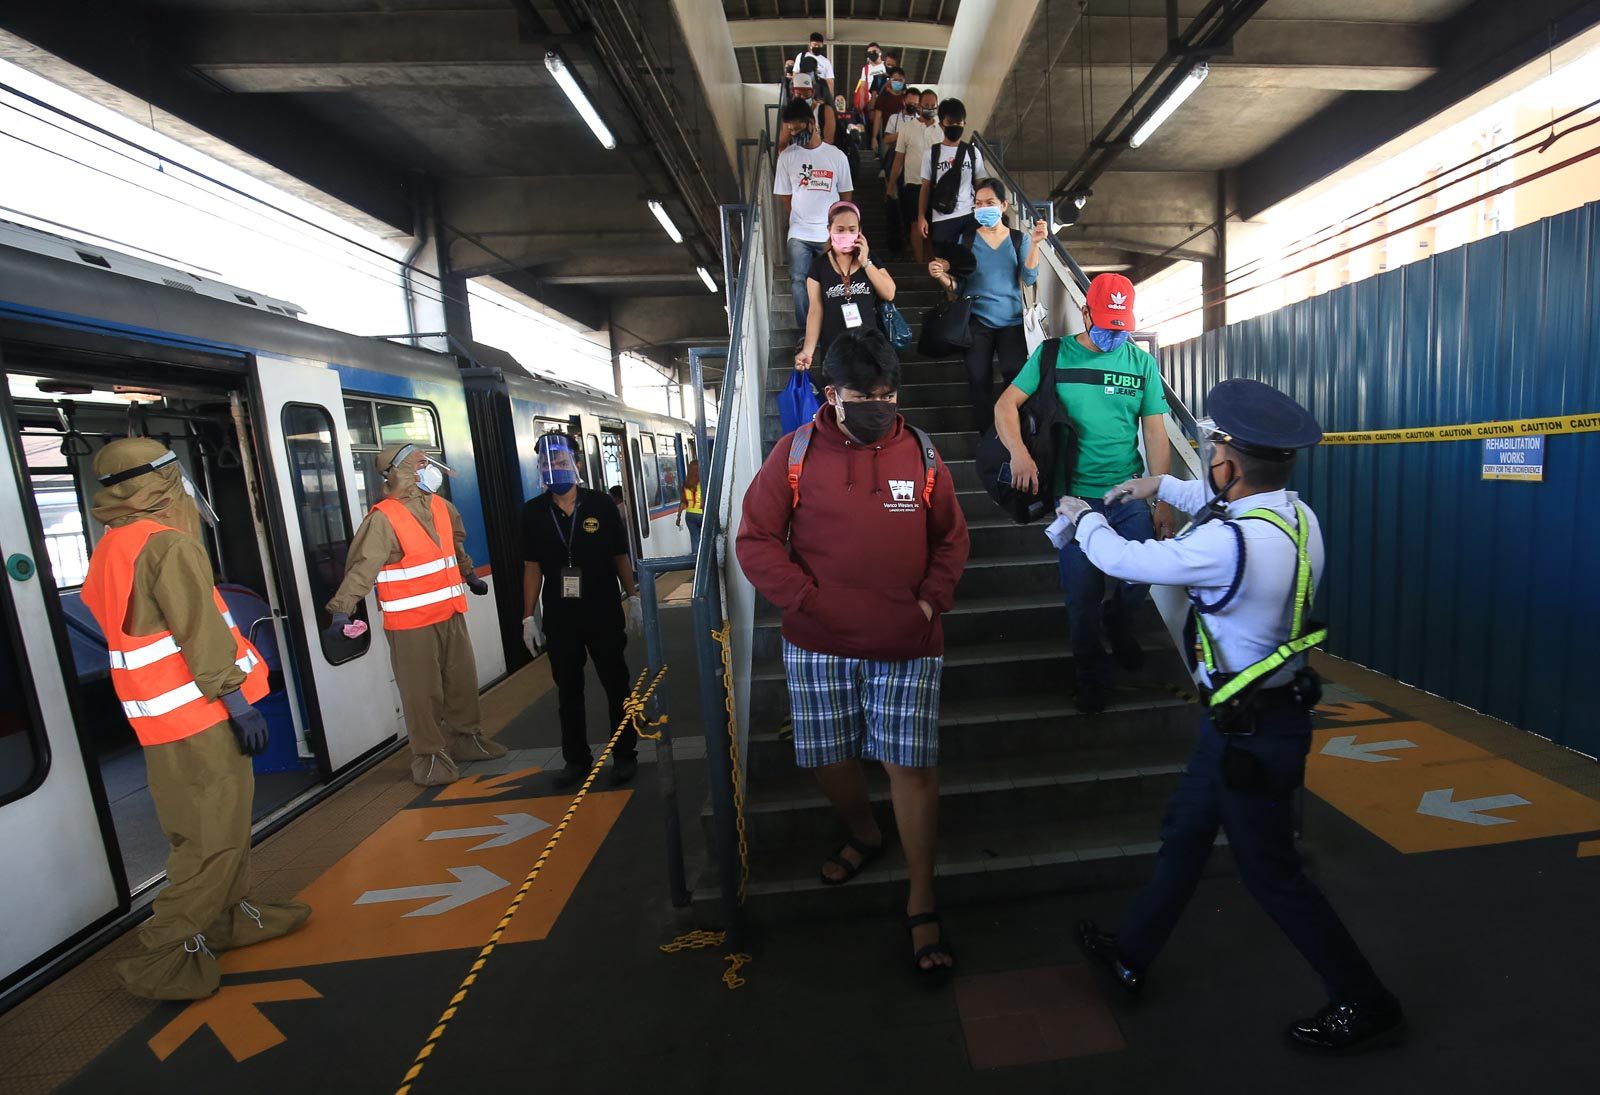 QUARANTINE MEASURES. Workers sanitize and disinfect seats and handrails before letting commuters in the coaches at the MRT3 Taft Station in Pasay City on June 1, 2020. Photo by Ben Nabong/Rappler 